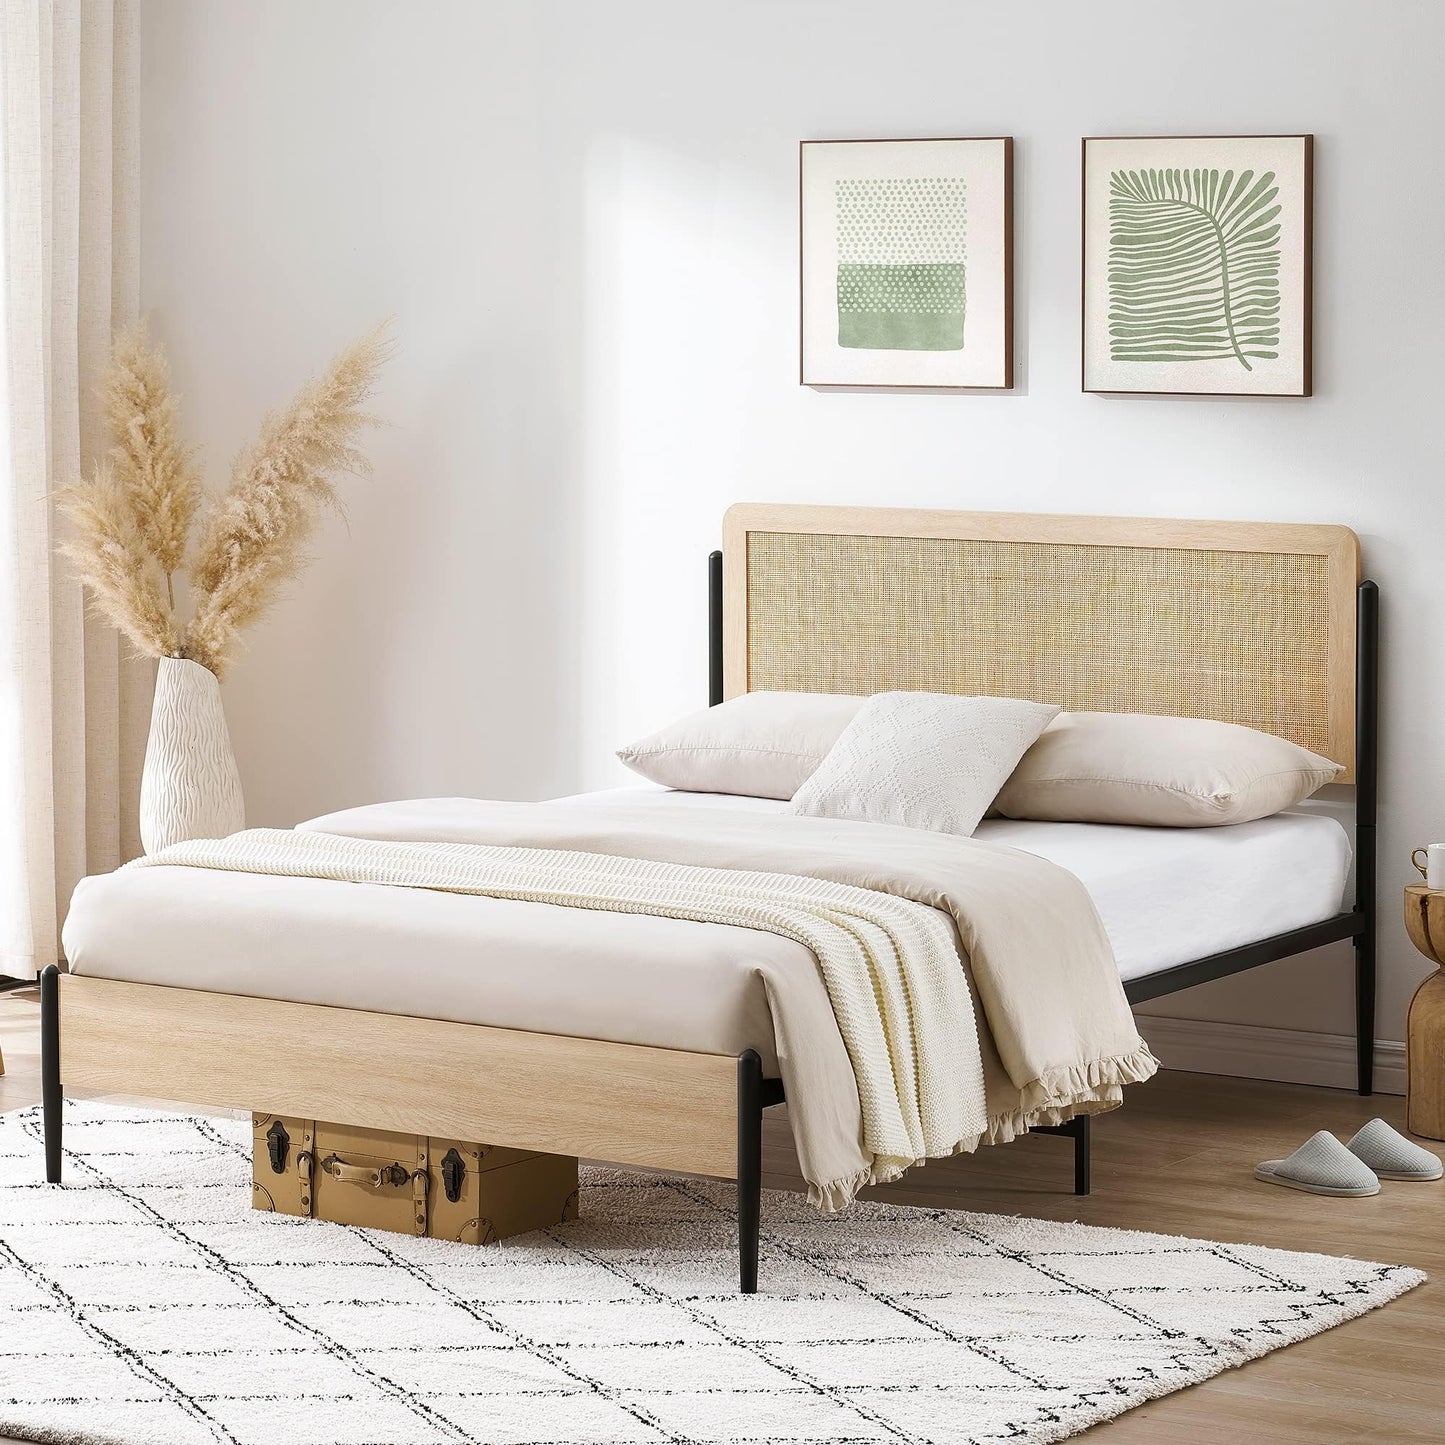 IDEALHOUSE Queen Size Bed Frame with Rattan Headboard, Platform Bed Frame with Safe Rounded Corners, Strong Metal Slats Support, Mattress Foundation,